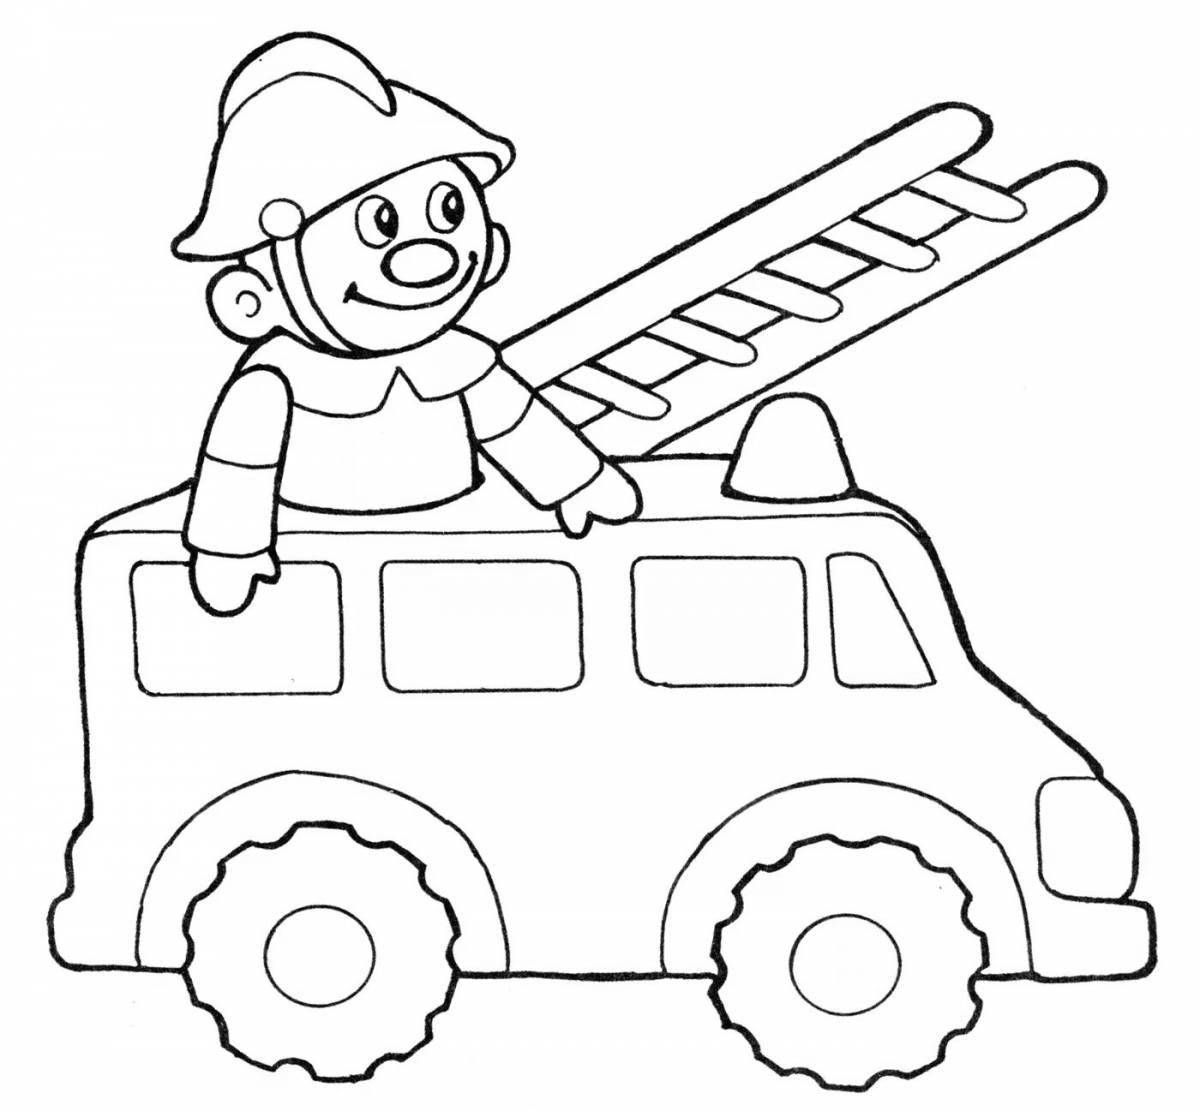 Shiny fire truck coloring book for 6-7 year olds